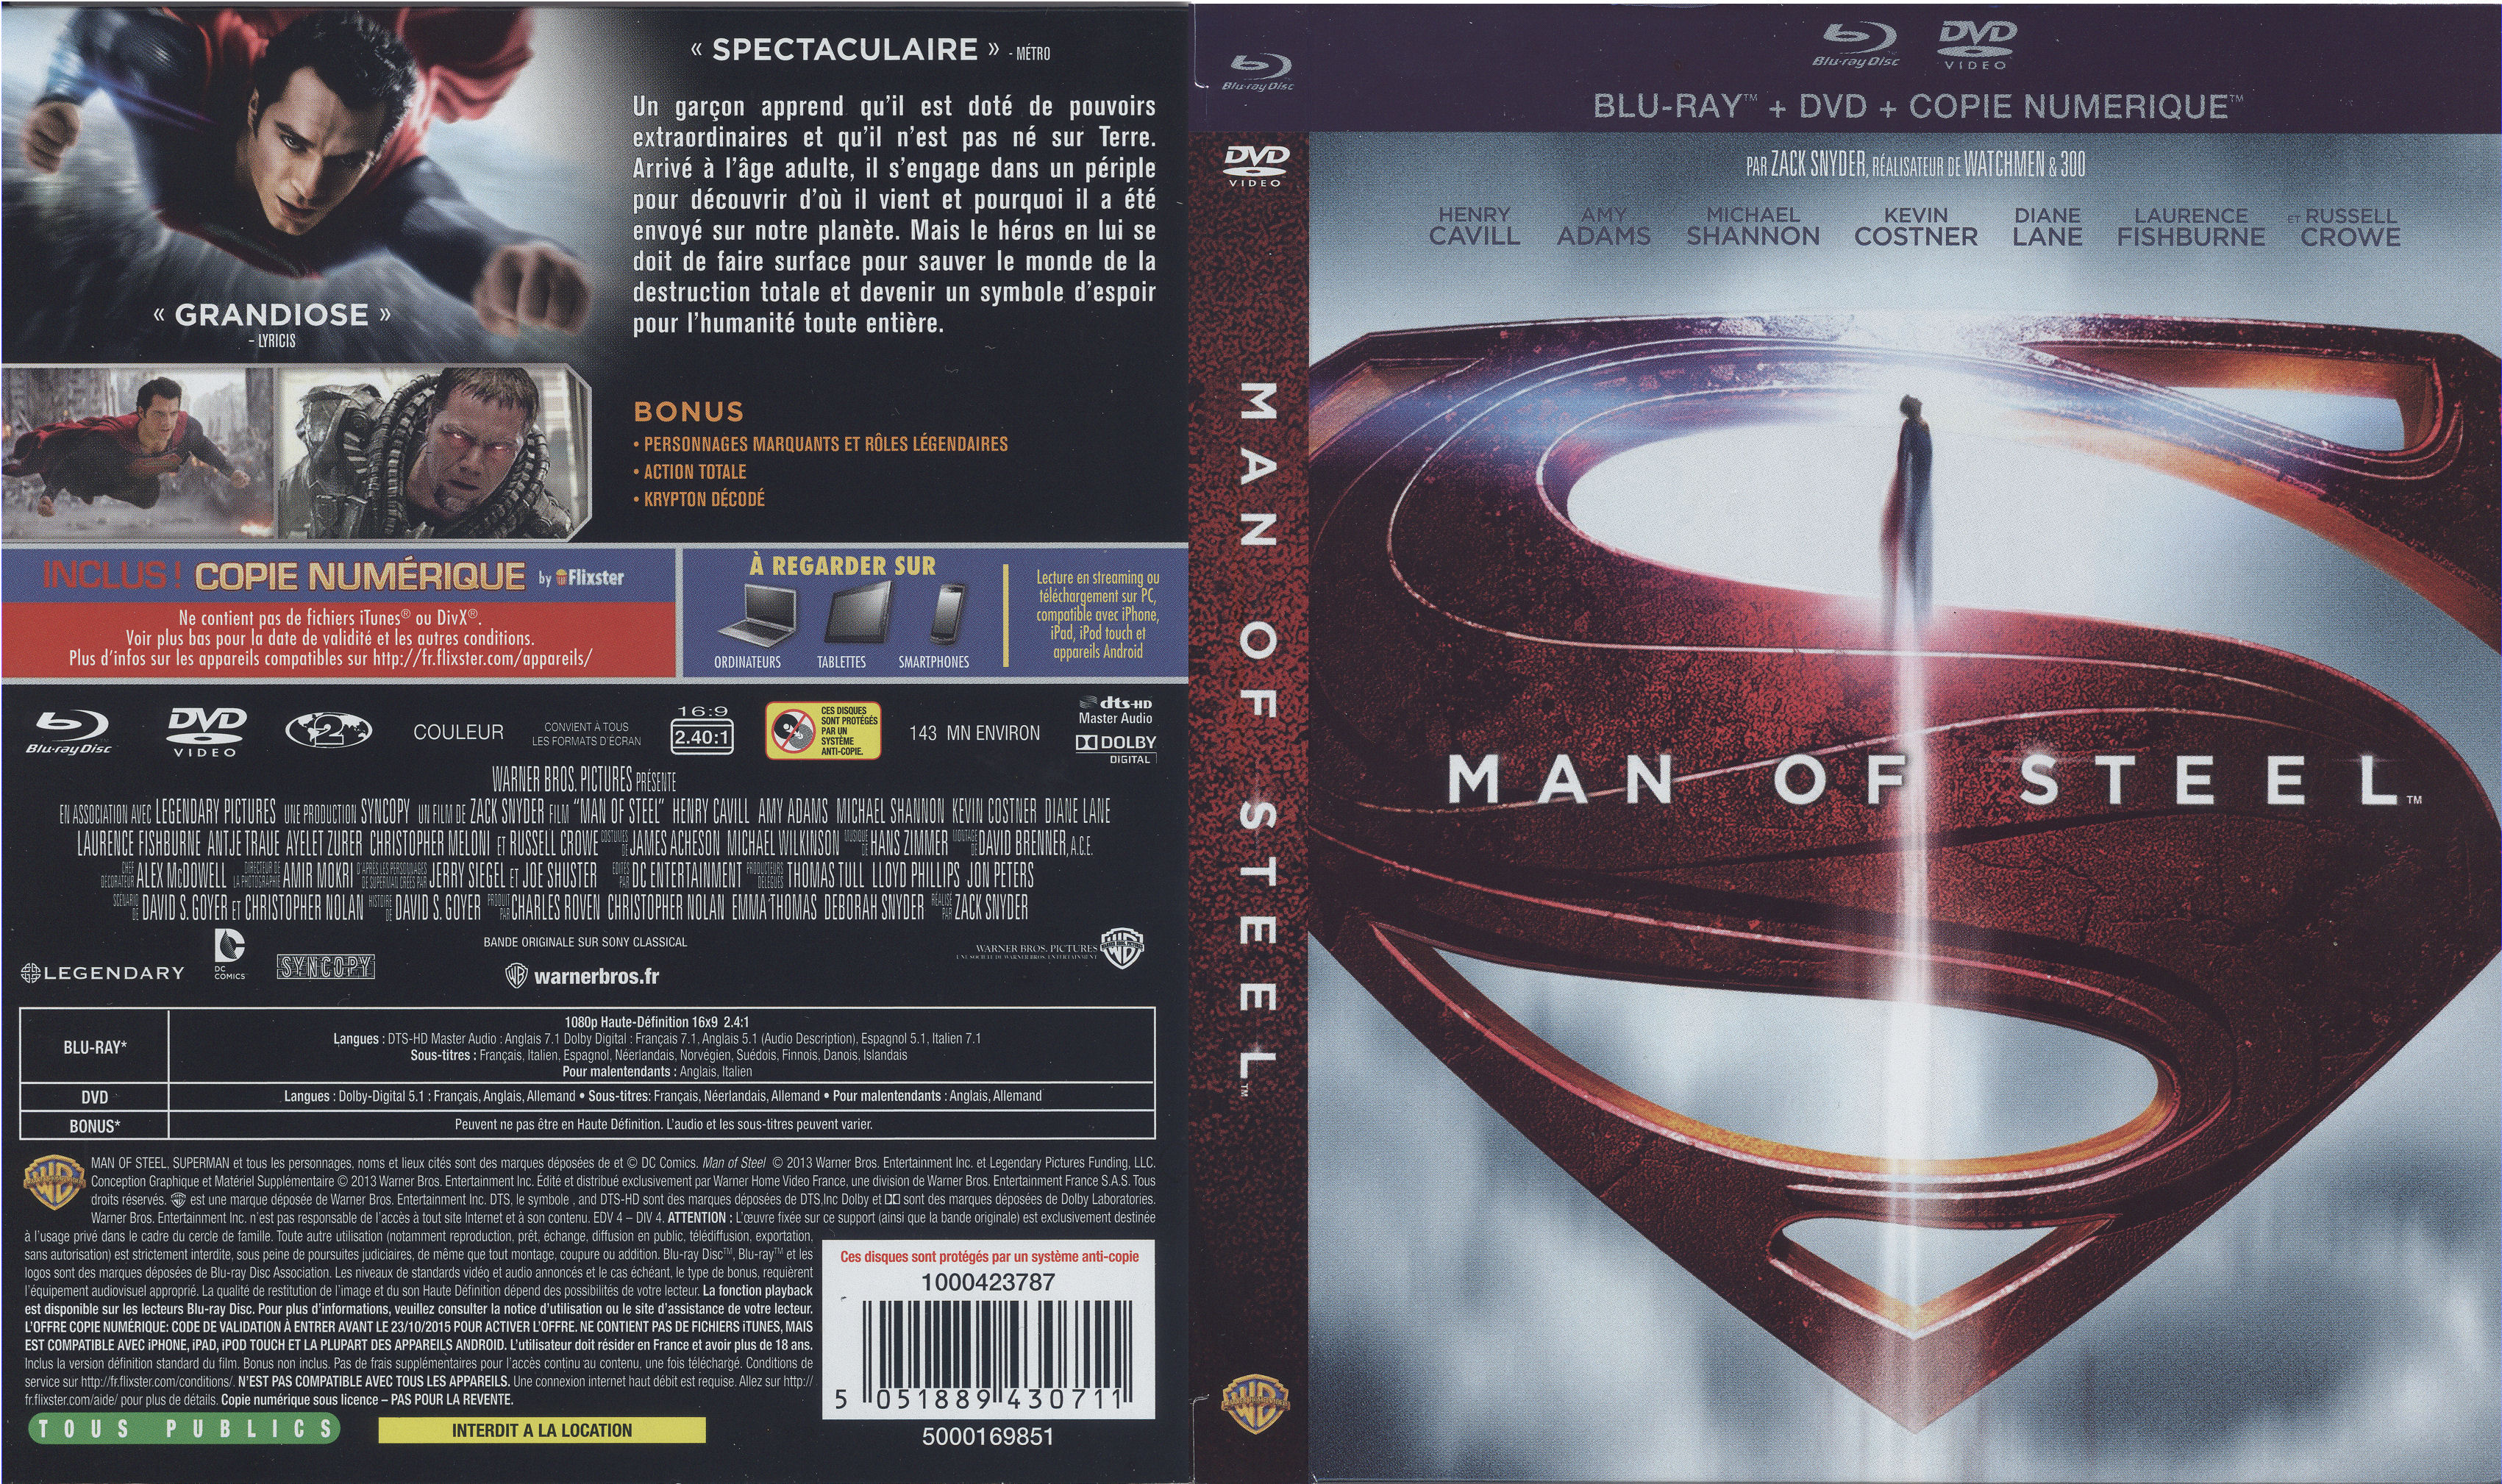 Jaquette DVD Man of Steel (BLU-RAY) v2